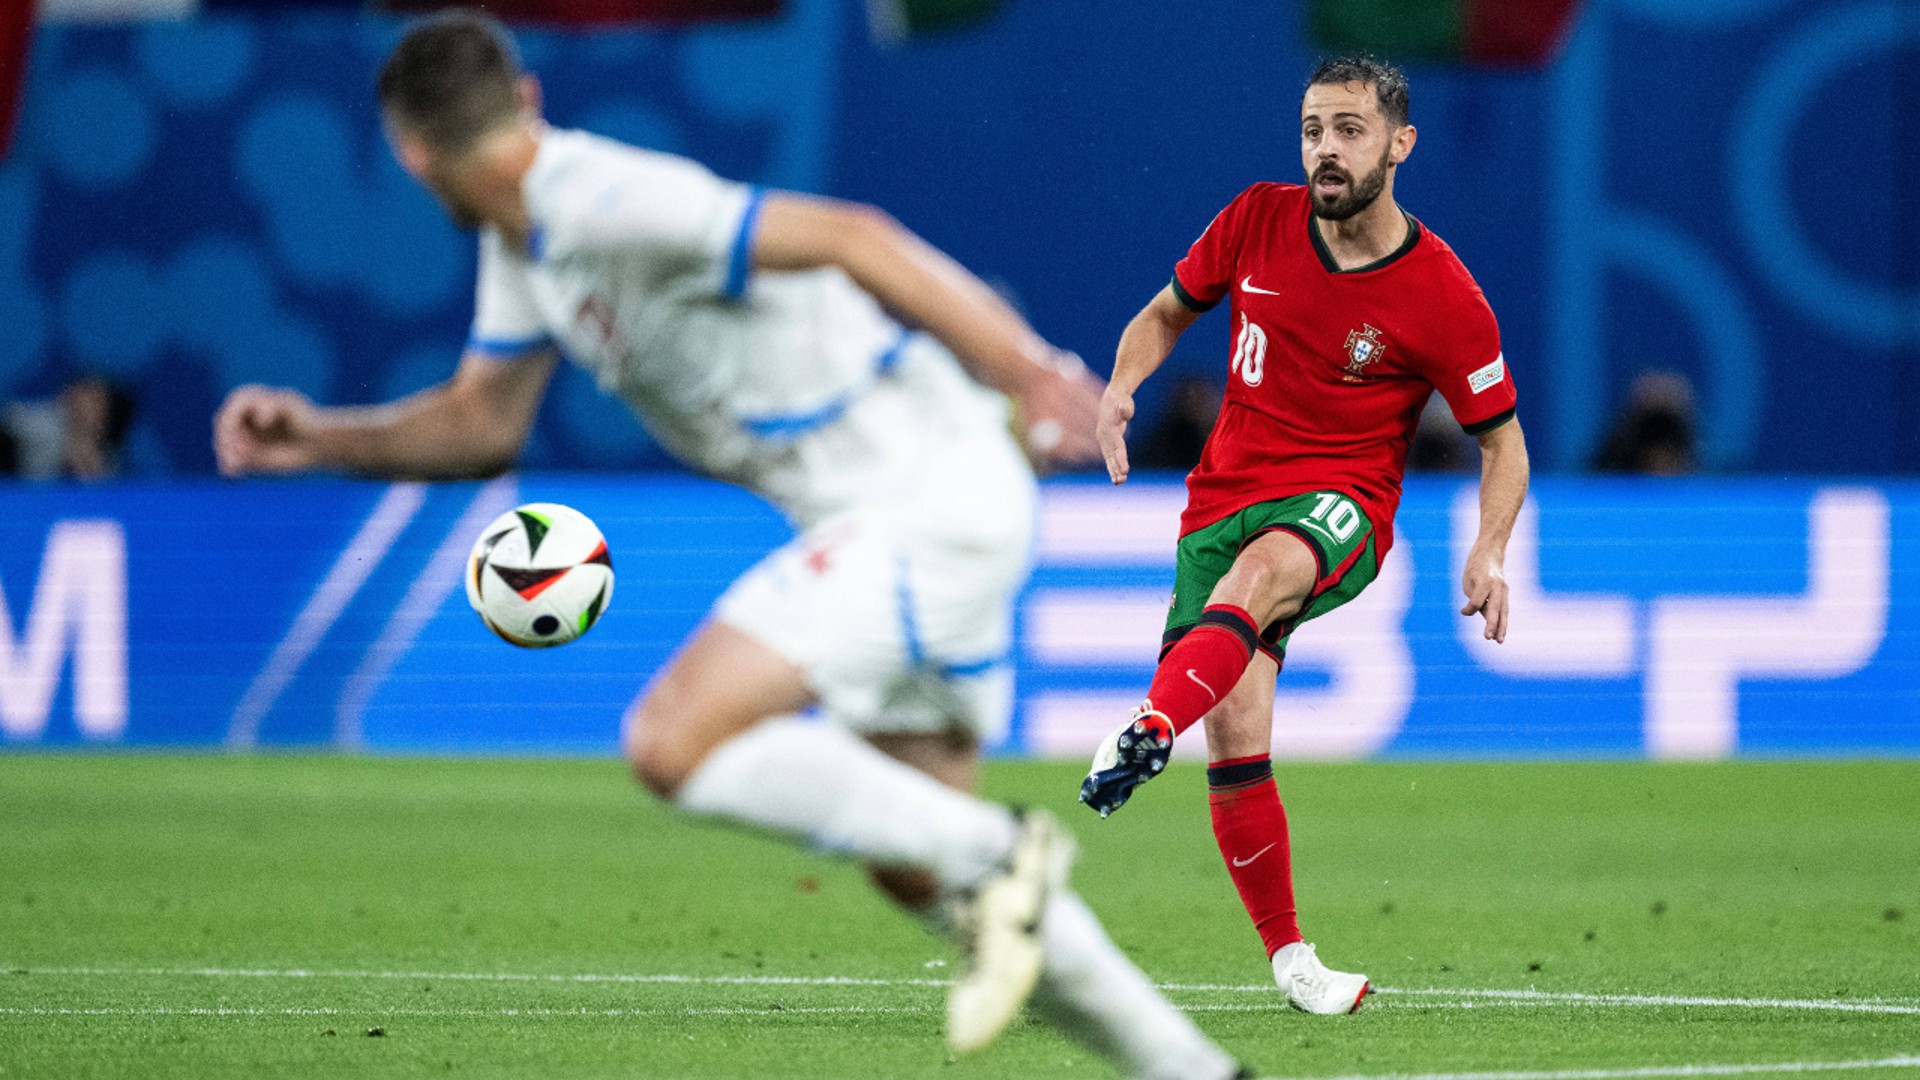 MIDDLE MARCH: Bernardo Silva looks to prompt a Portugal attack.